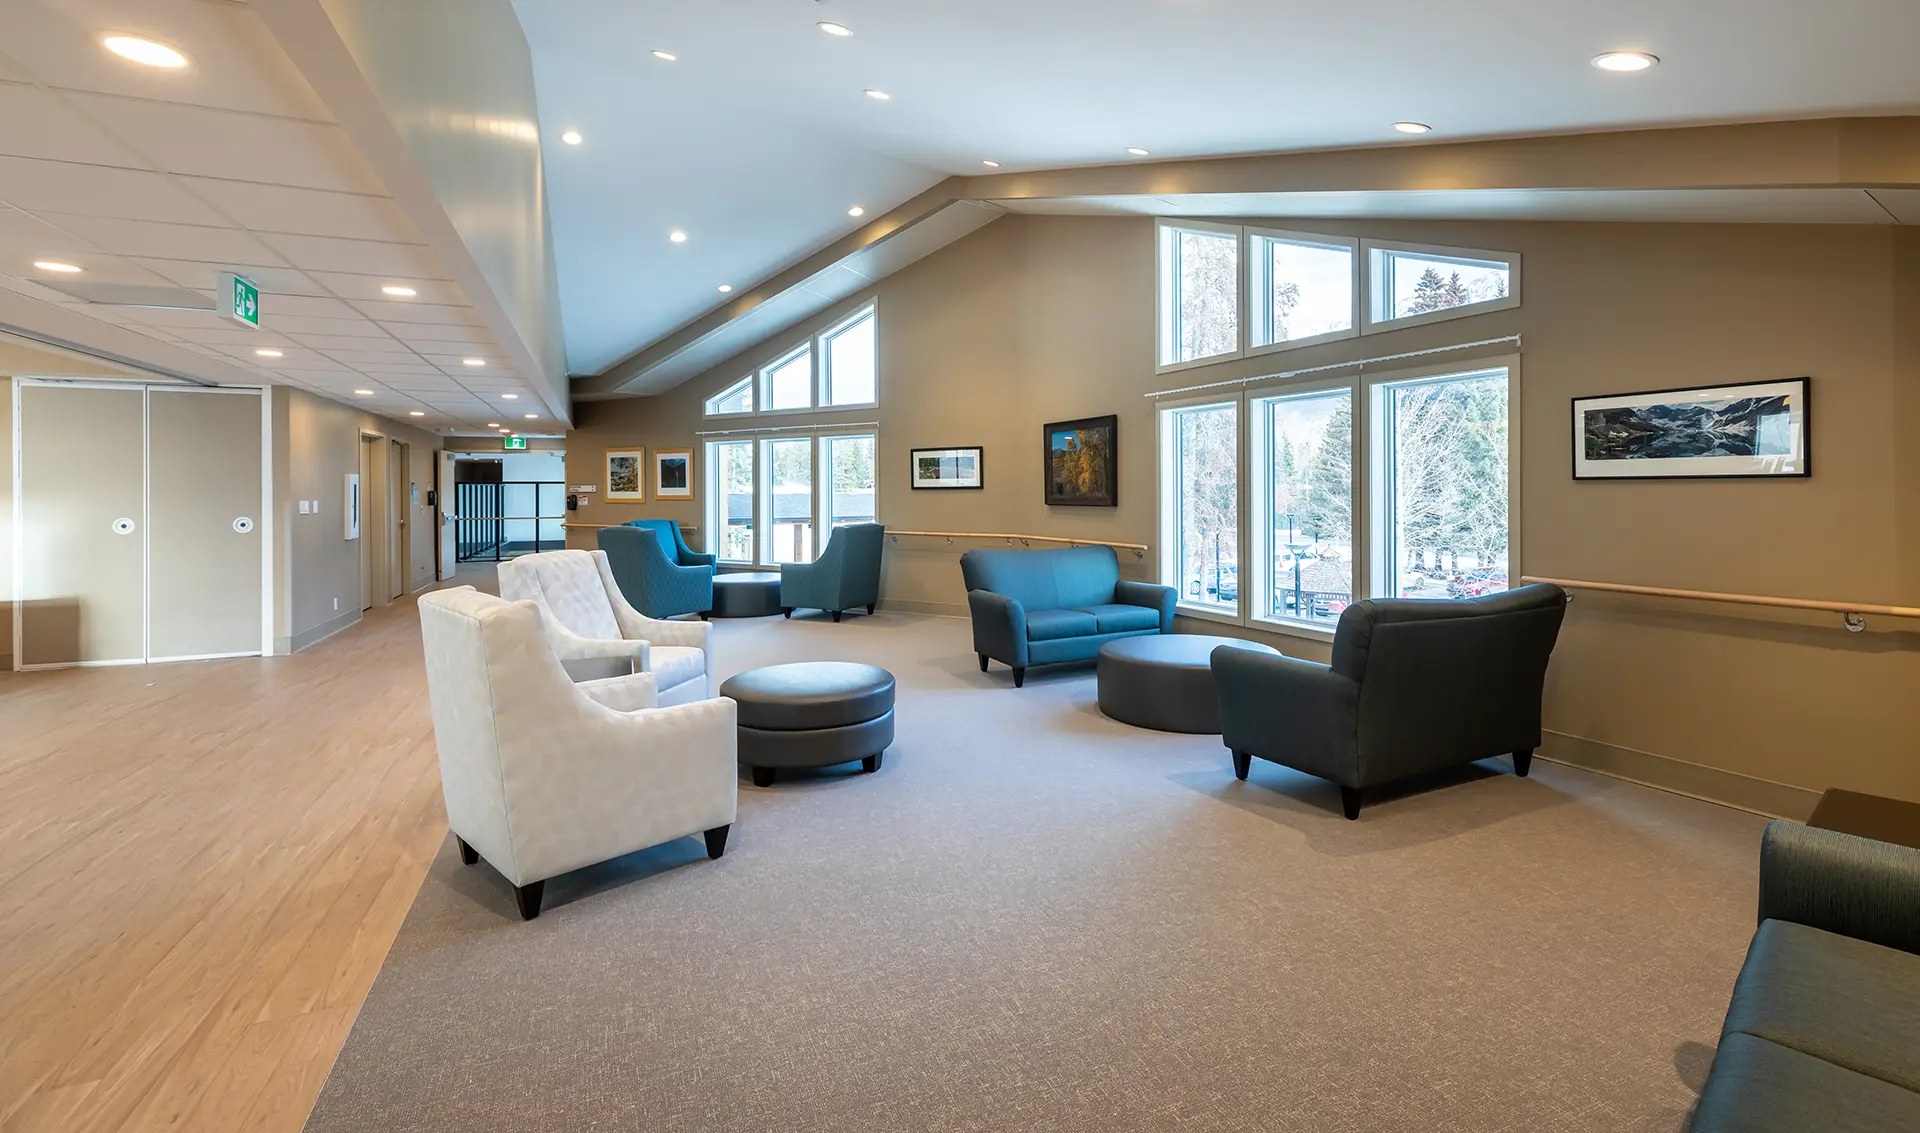 Seniors Lodge, Canmore, AB, designed by METAFOR